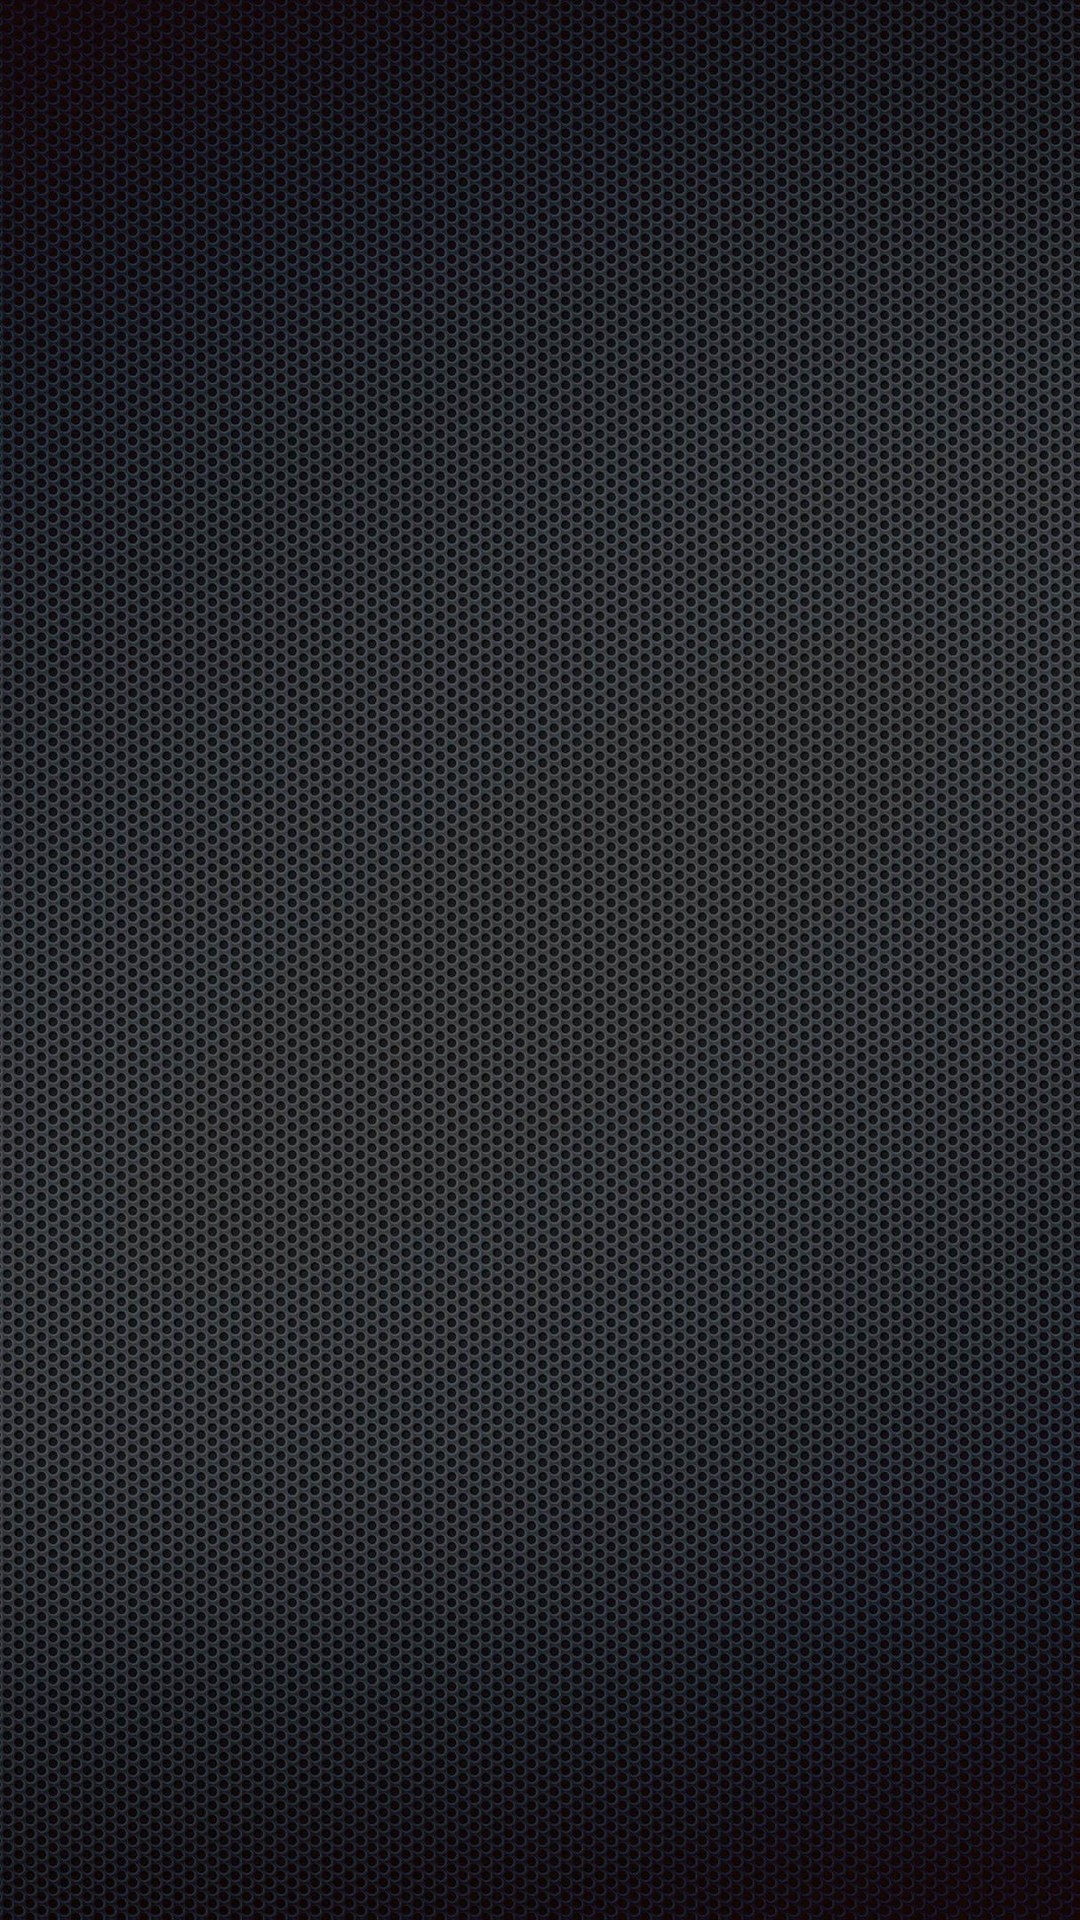 Black Grill Texture Wallpaper for LG G2